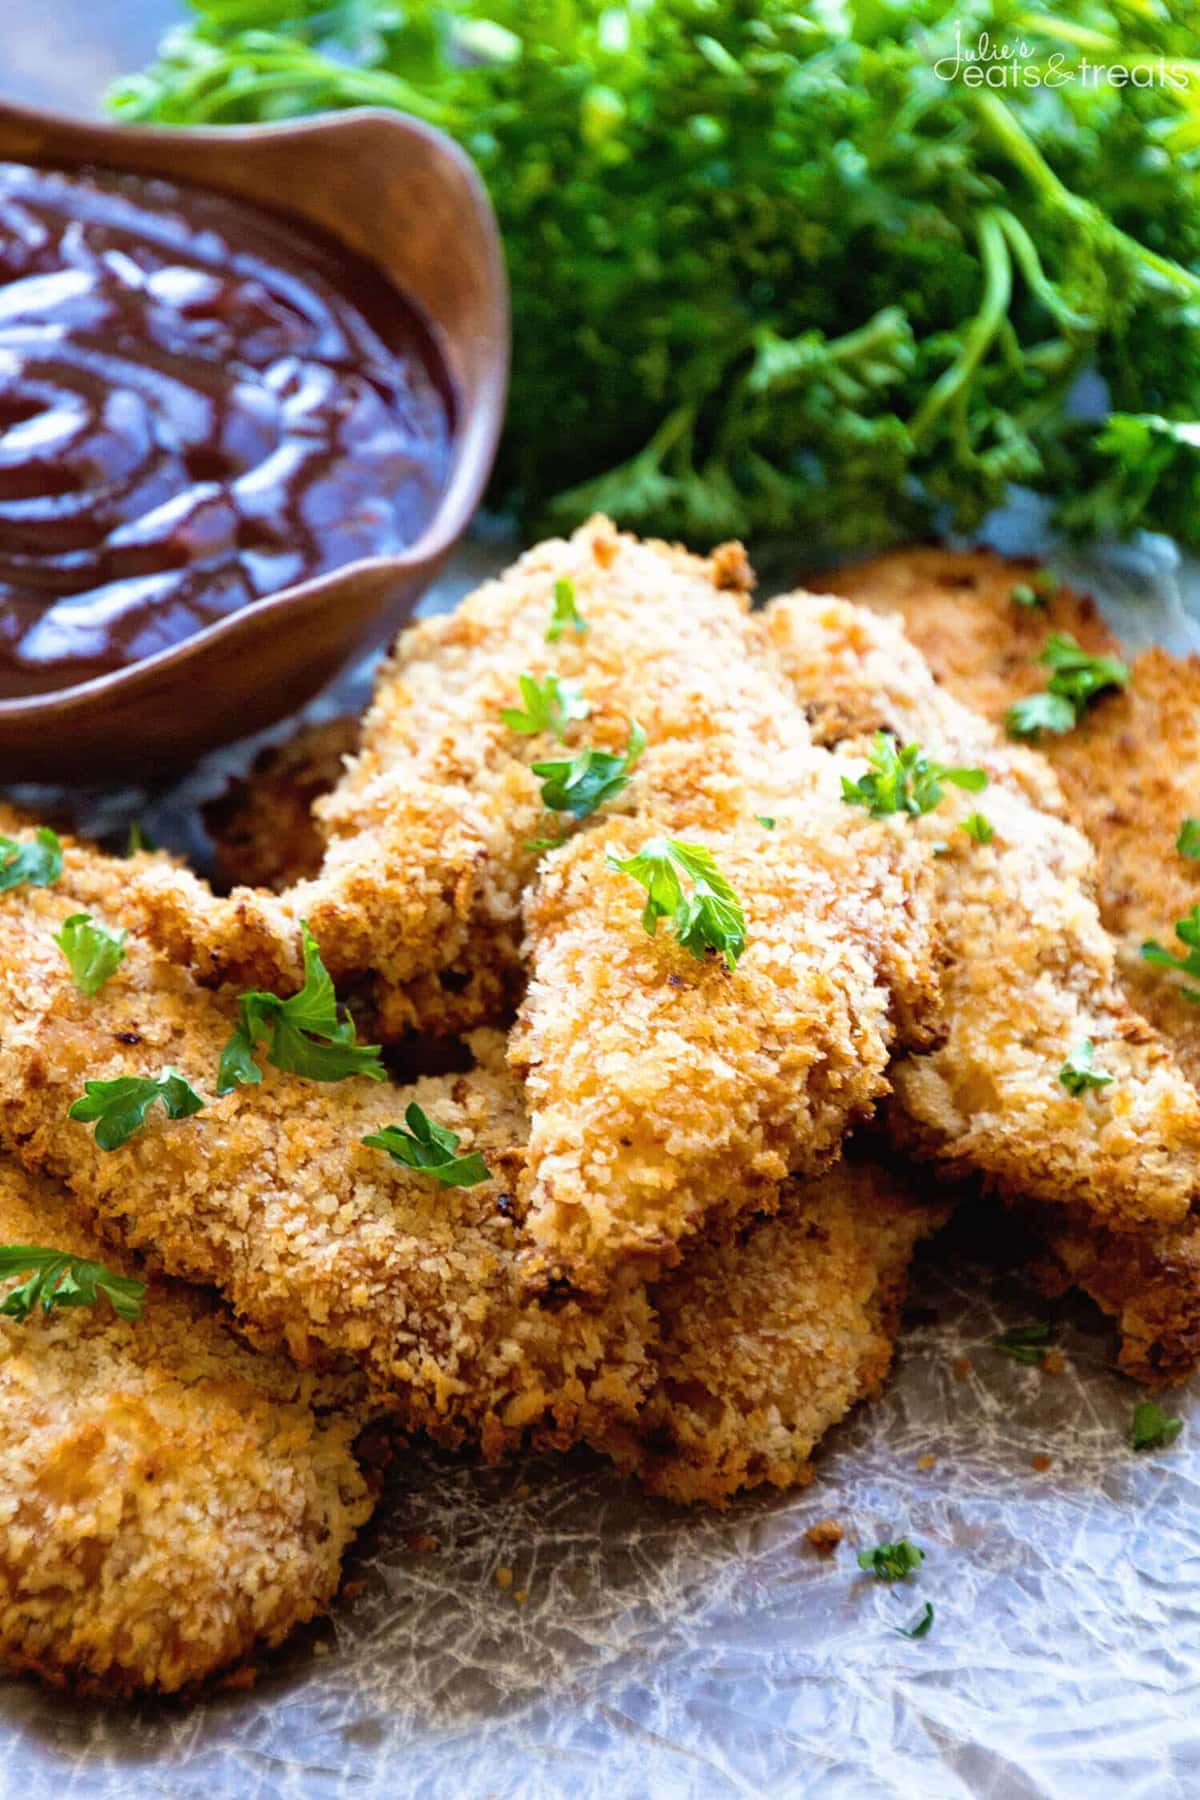 BBQ Baked Chicken Fingers Recipe ~ Homemade Chicken Fingers that are Marinated in BBQ Sauce then Dipped in Egg and Panko Crumbs for a Delicious Homemade Chicken Finger! 